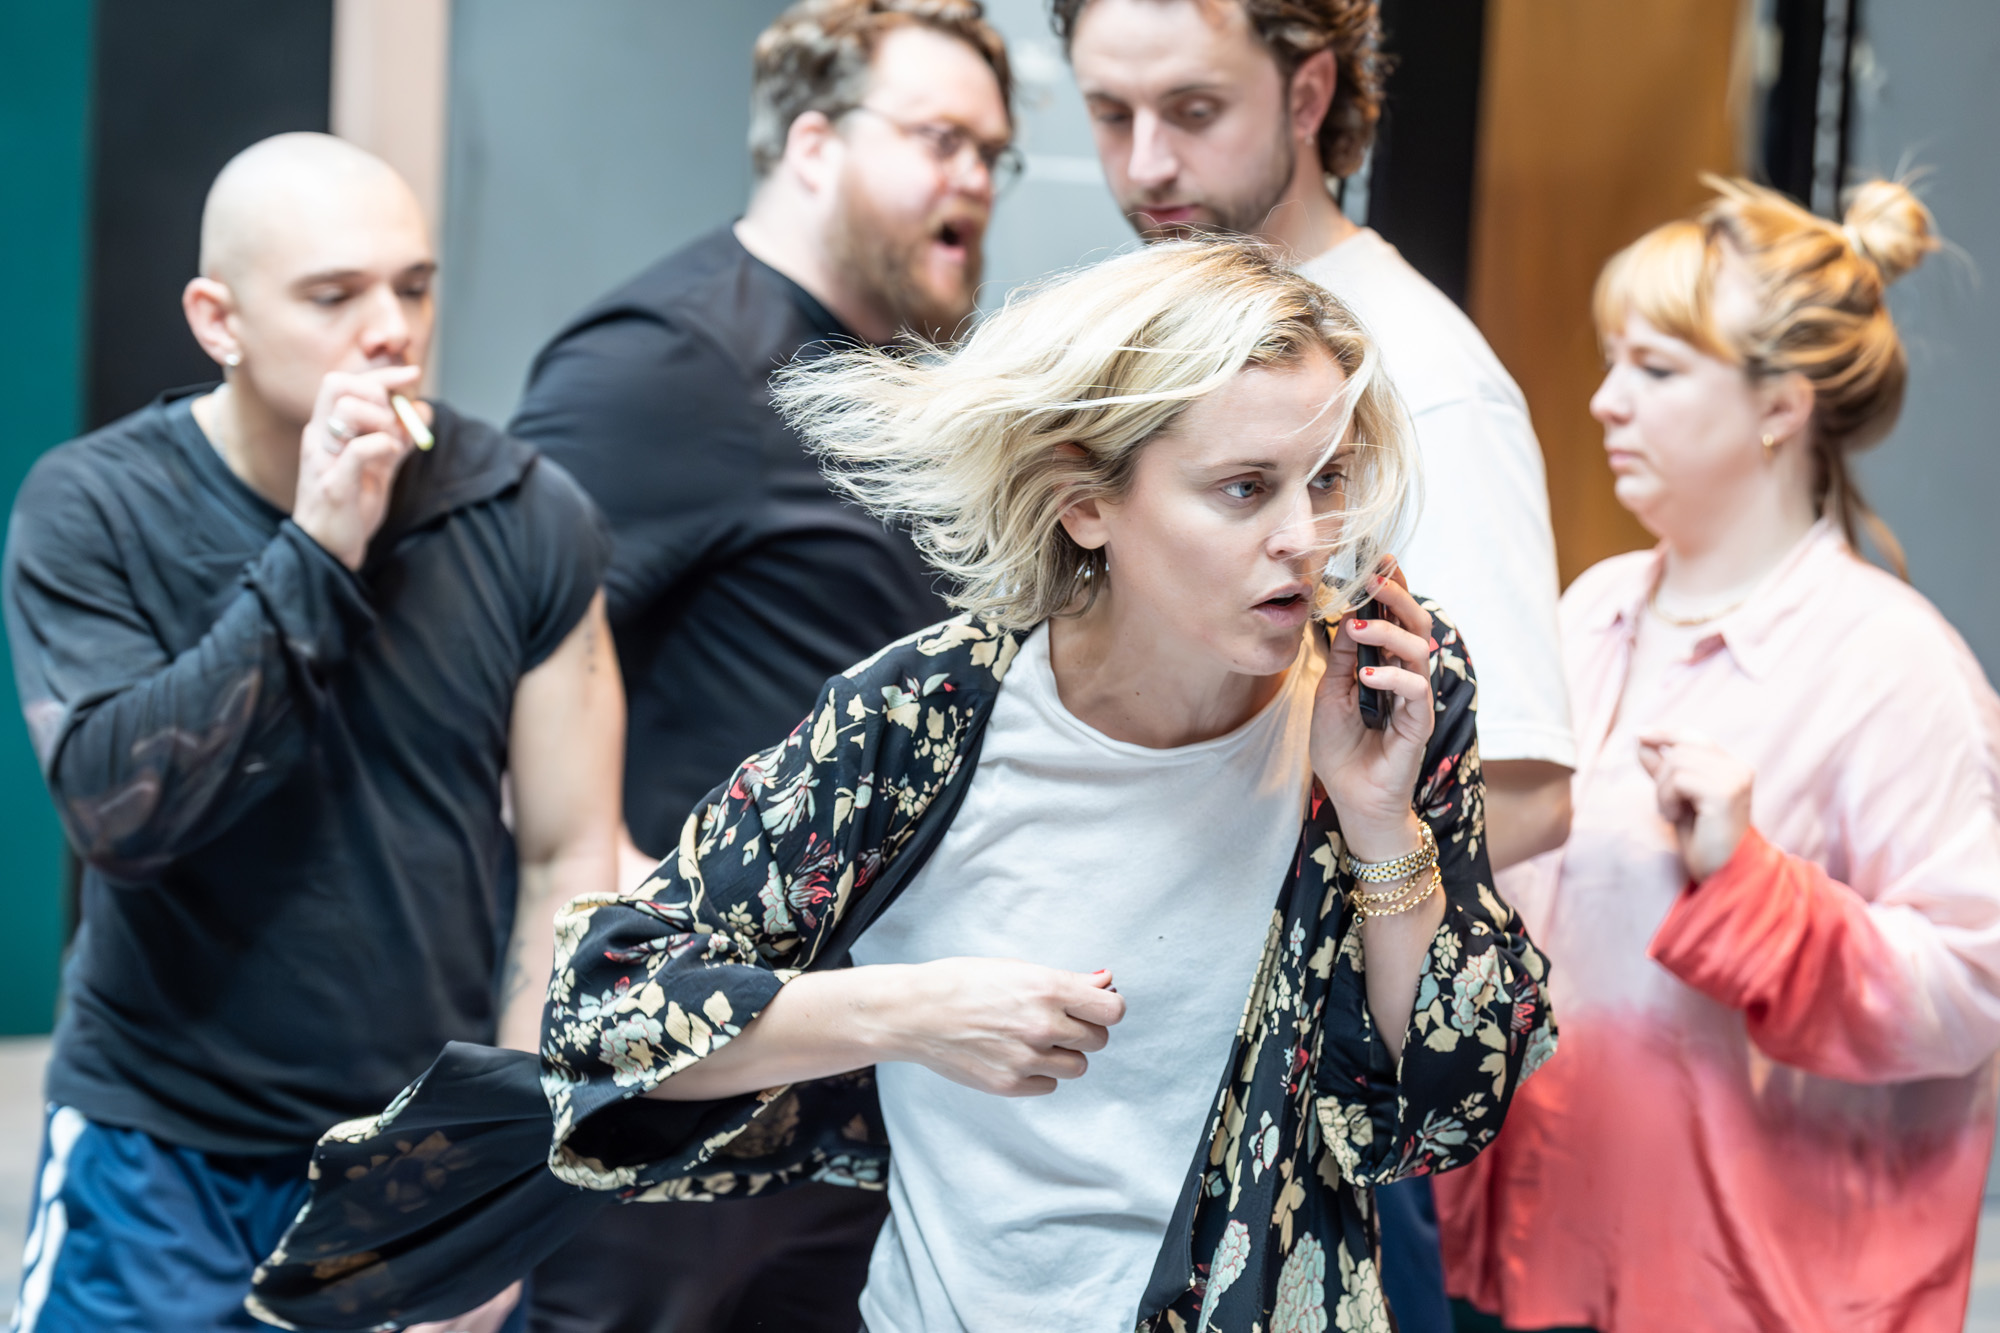 Dillon Scott Lewis, Denise Gough, Danny Kirrane, Ryan Hutton and Polly Bennett (movement director) in rehearsals for People, Places & Things in the West End. Credit Marc Brenner. 2441